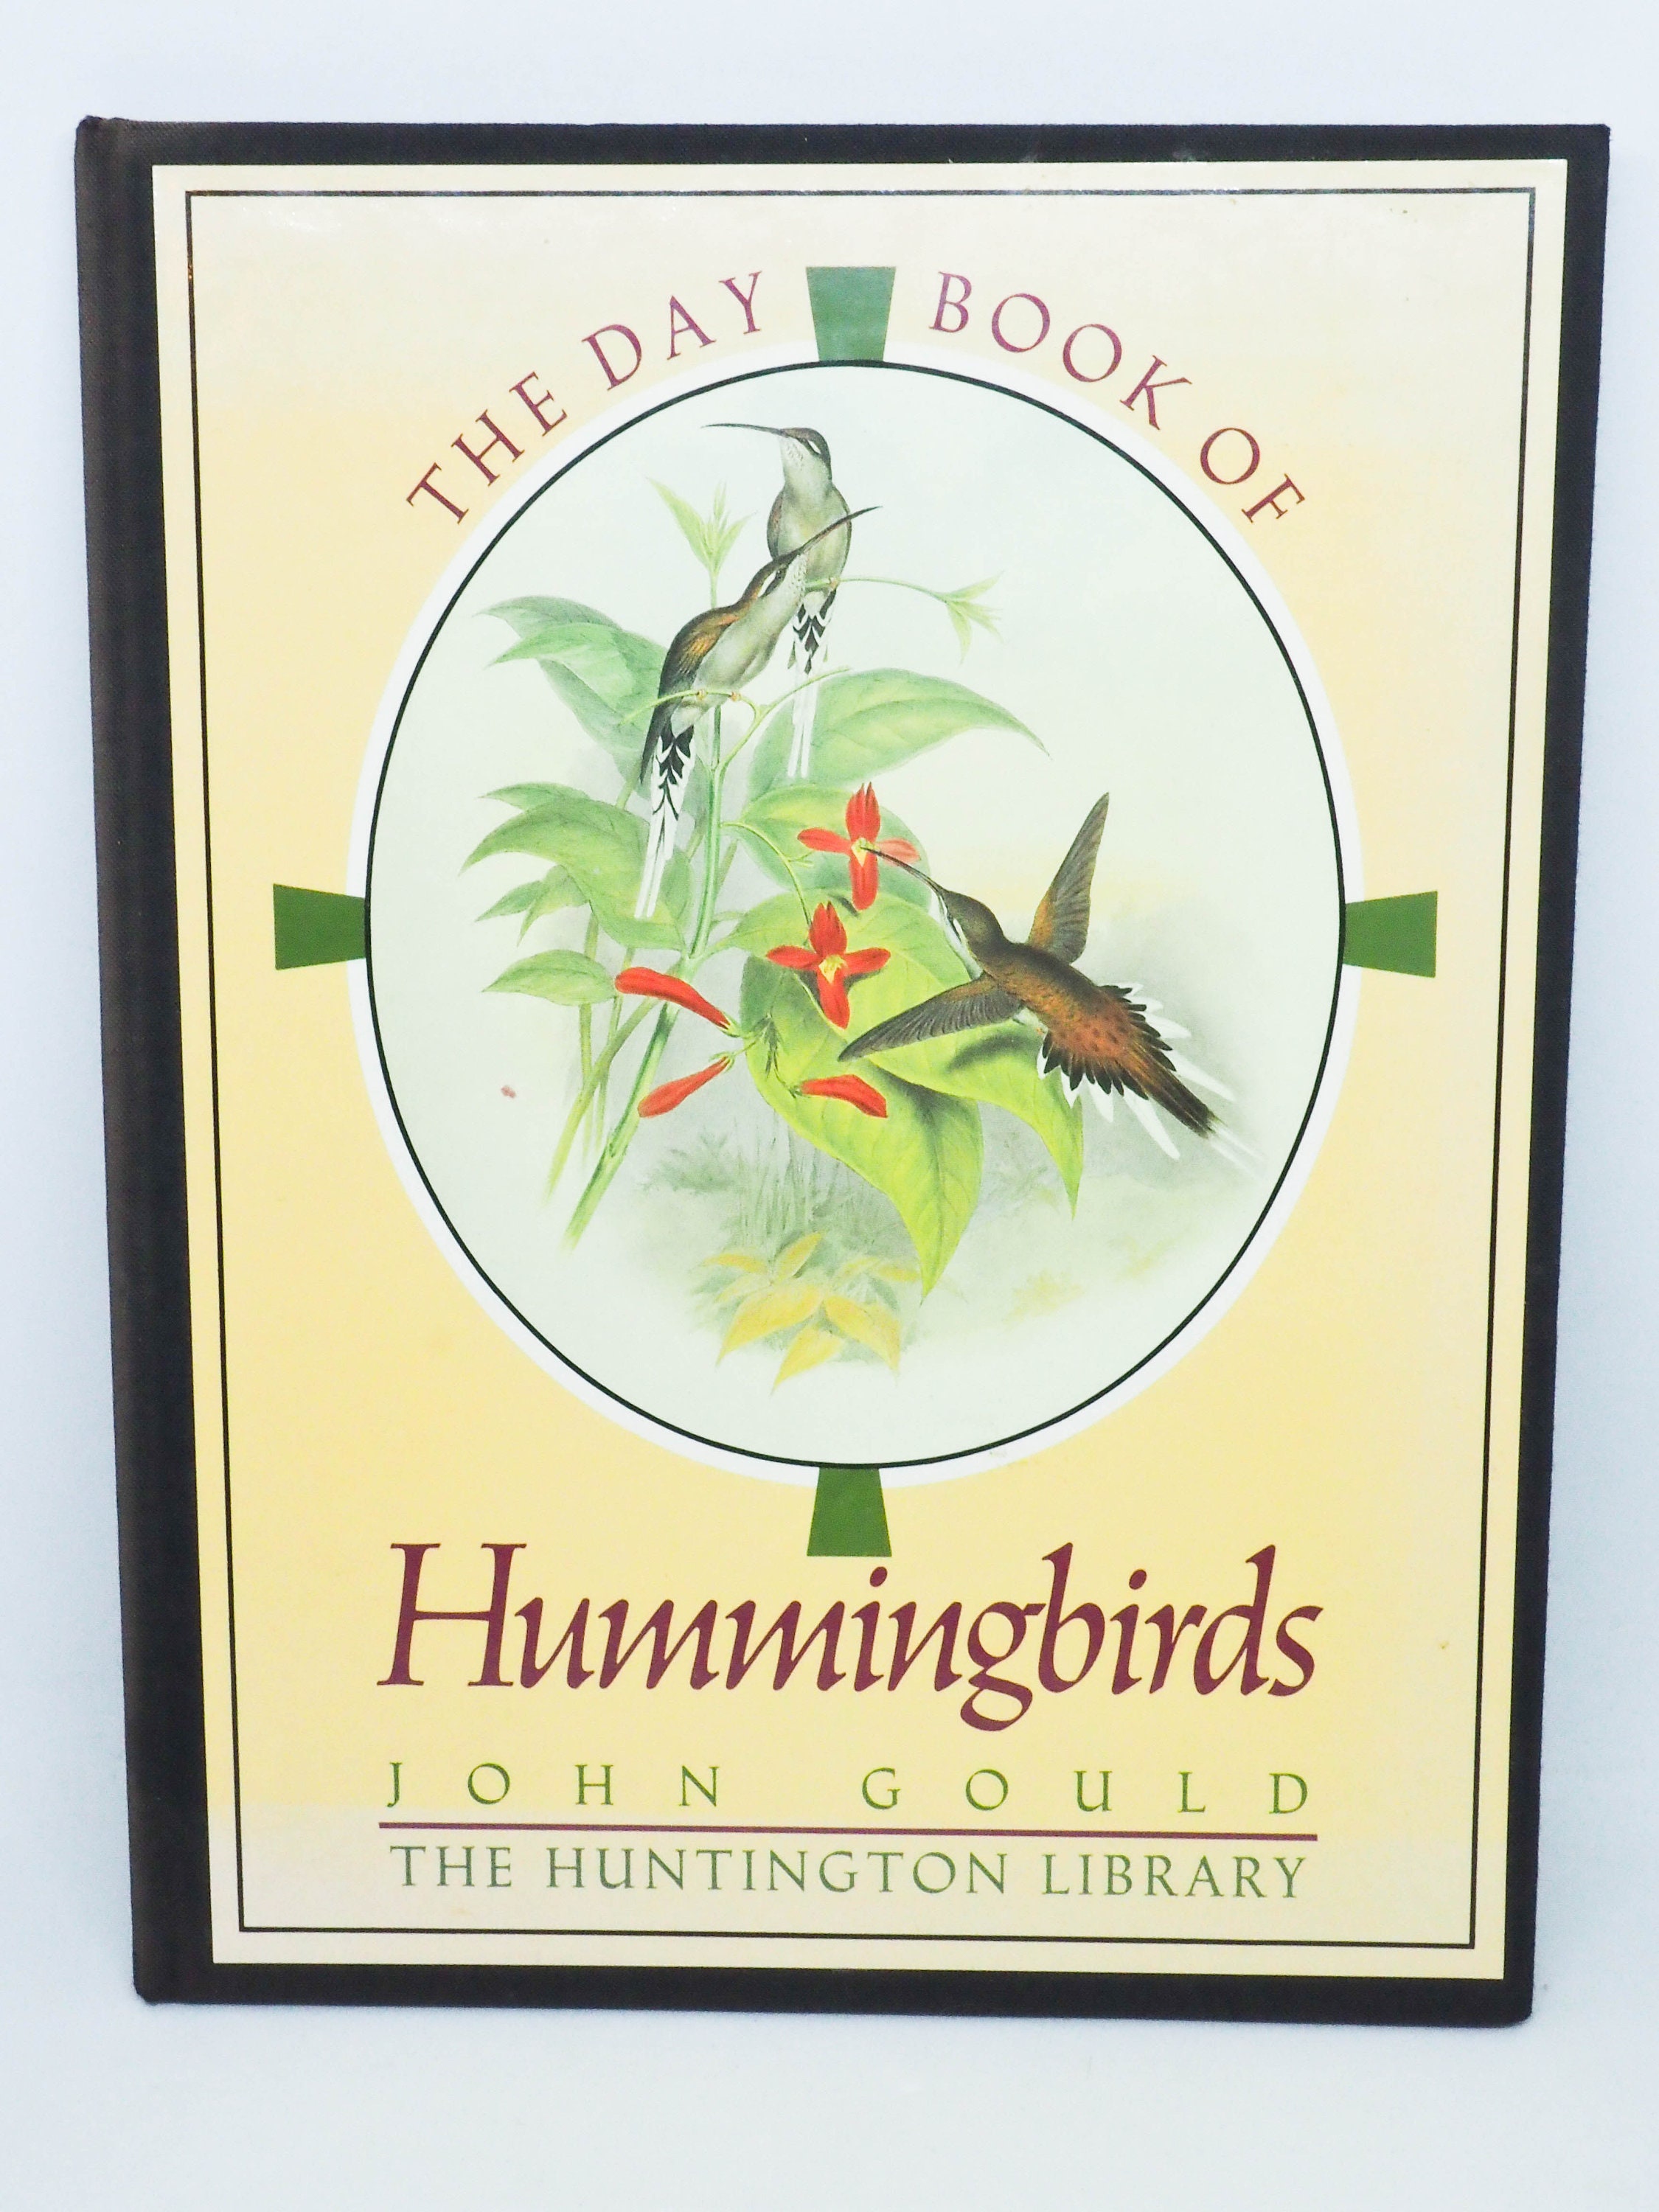 The Day Book of Hummingbirds John Gould Hardcover Book image